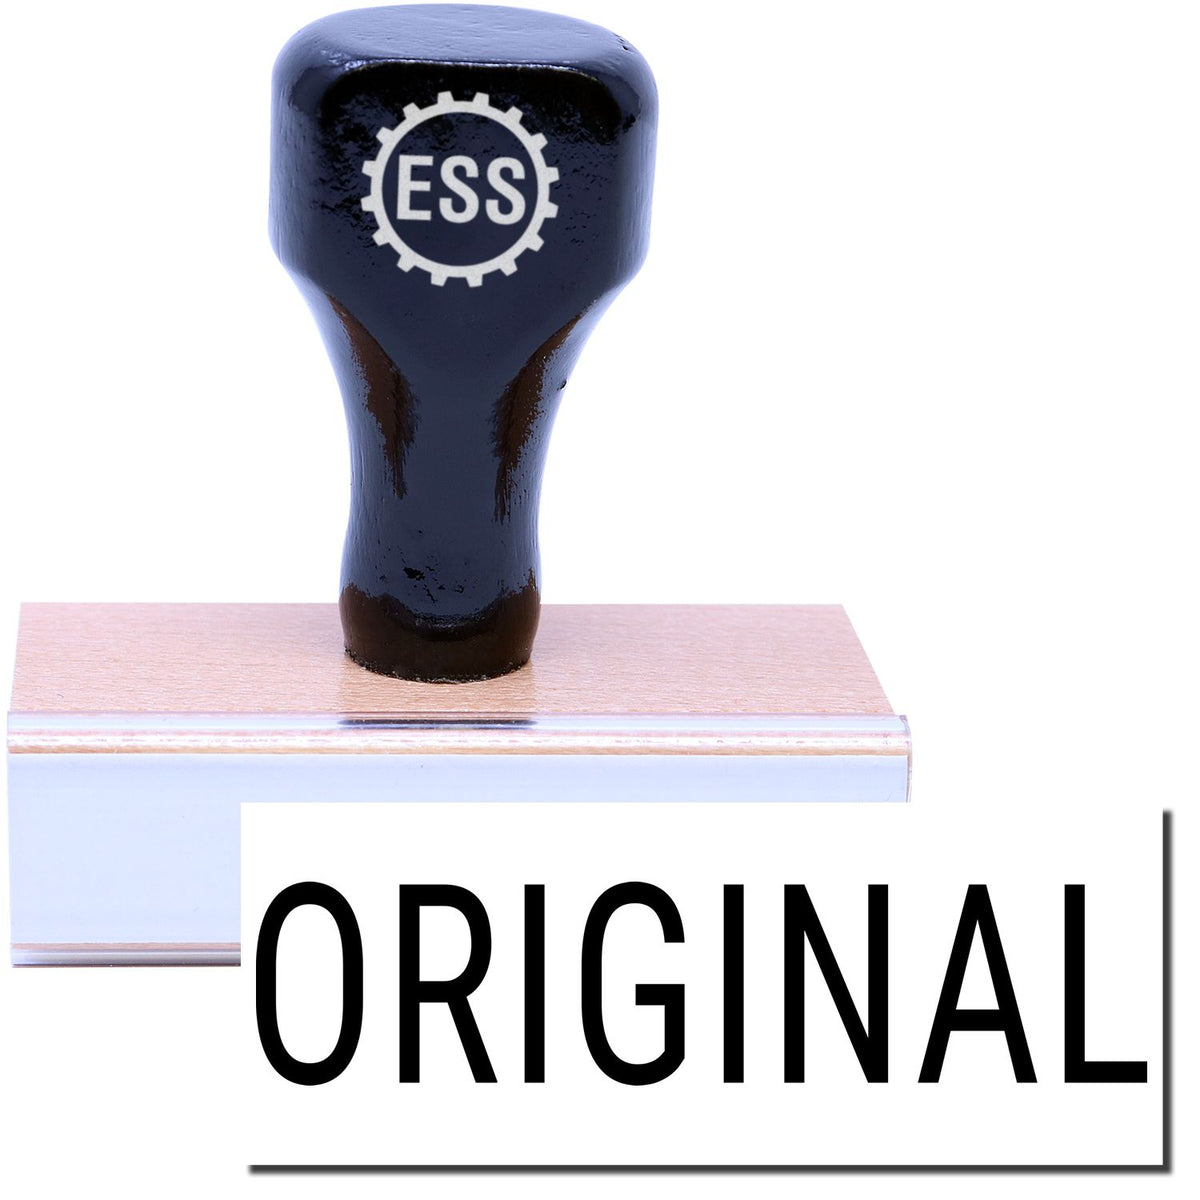 A stock office rubber stamp with a stamped image showing how the text &quot;ORIGINAL&quot; in a narrow font is displayed after stamping.